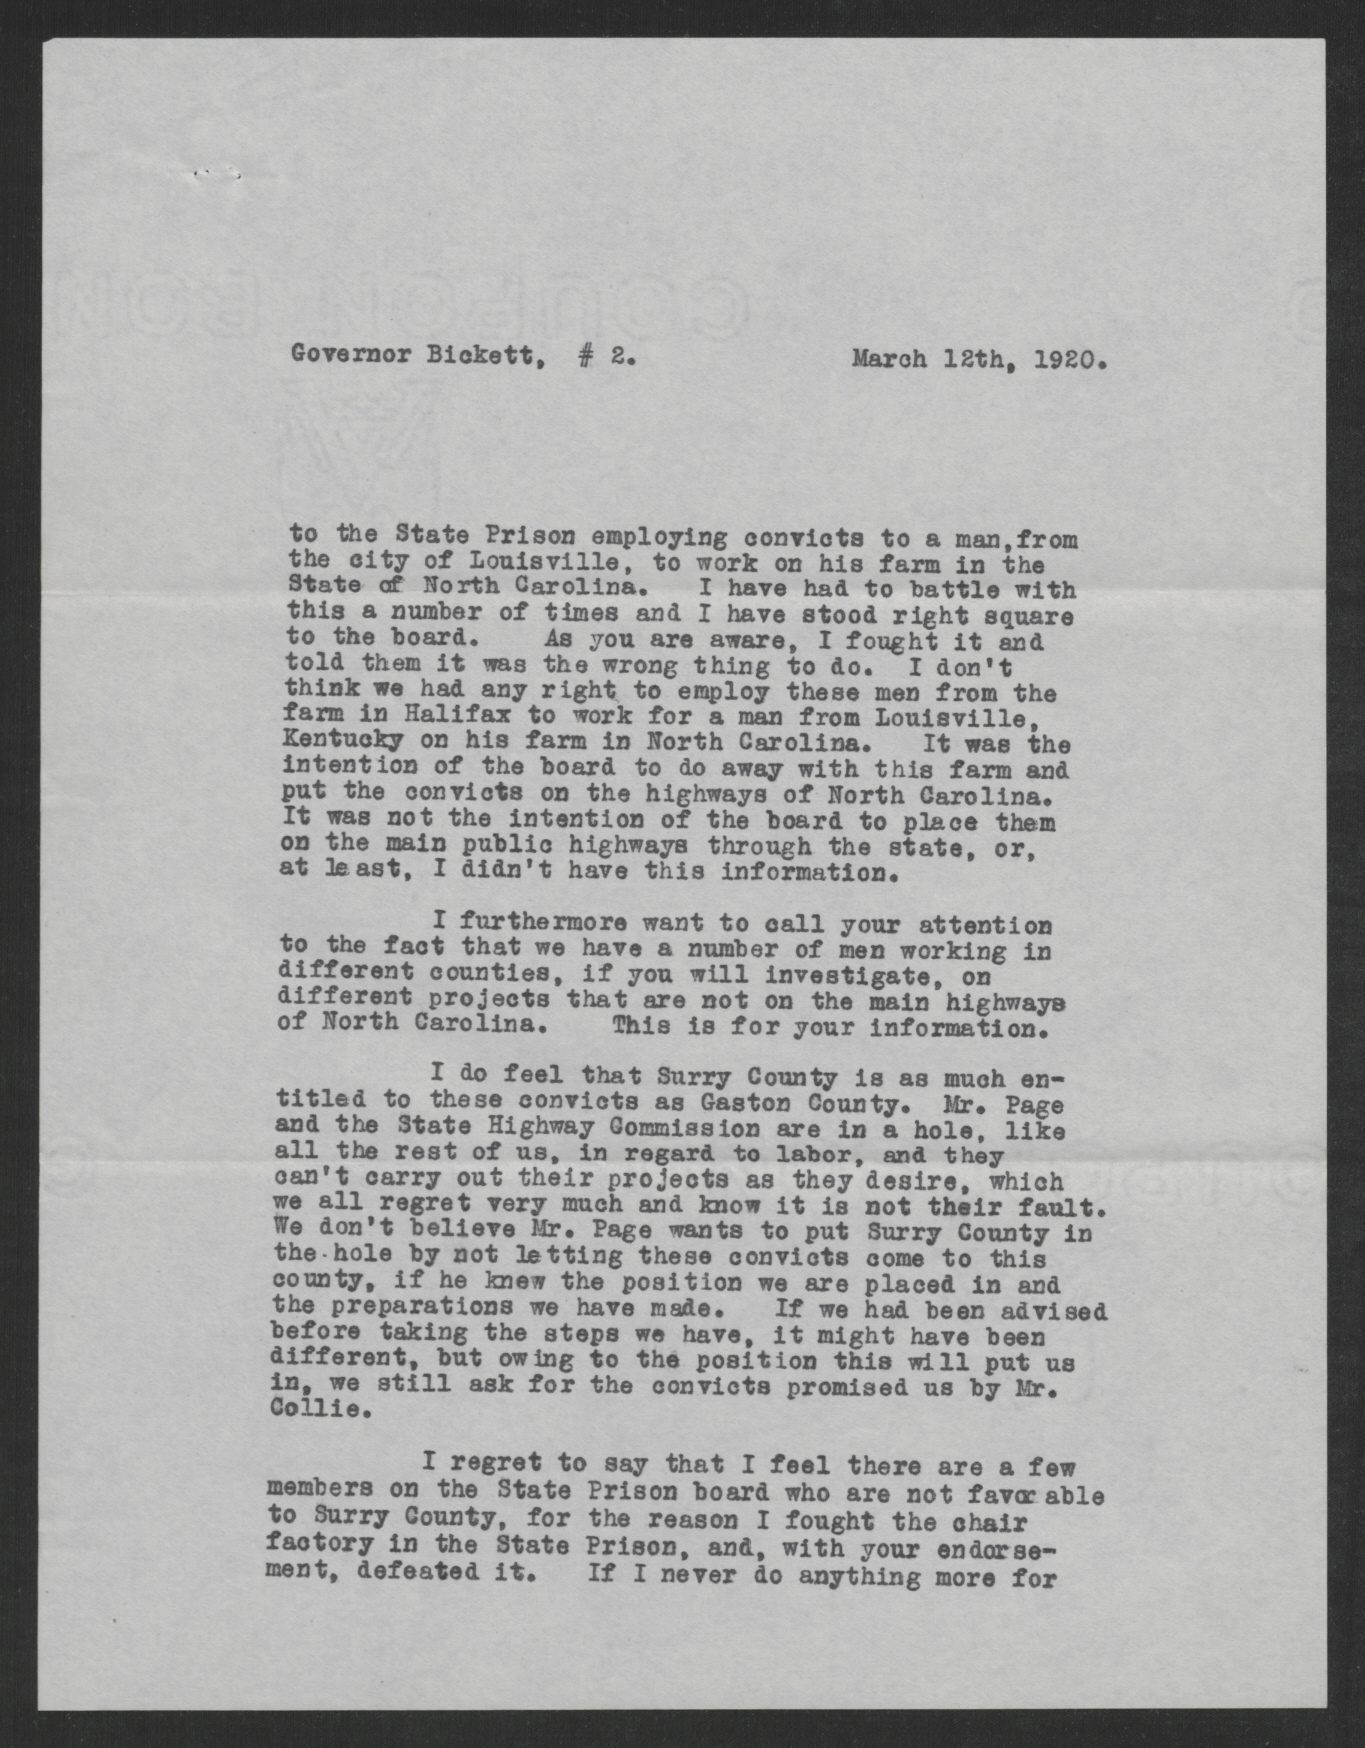 Smith to Bickett, March 12, 1920, page 2